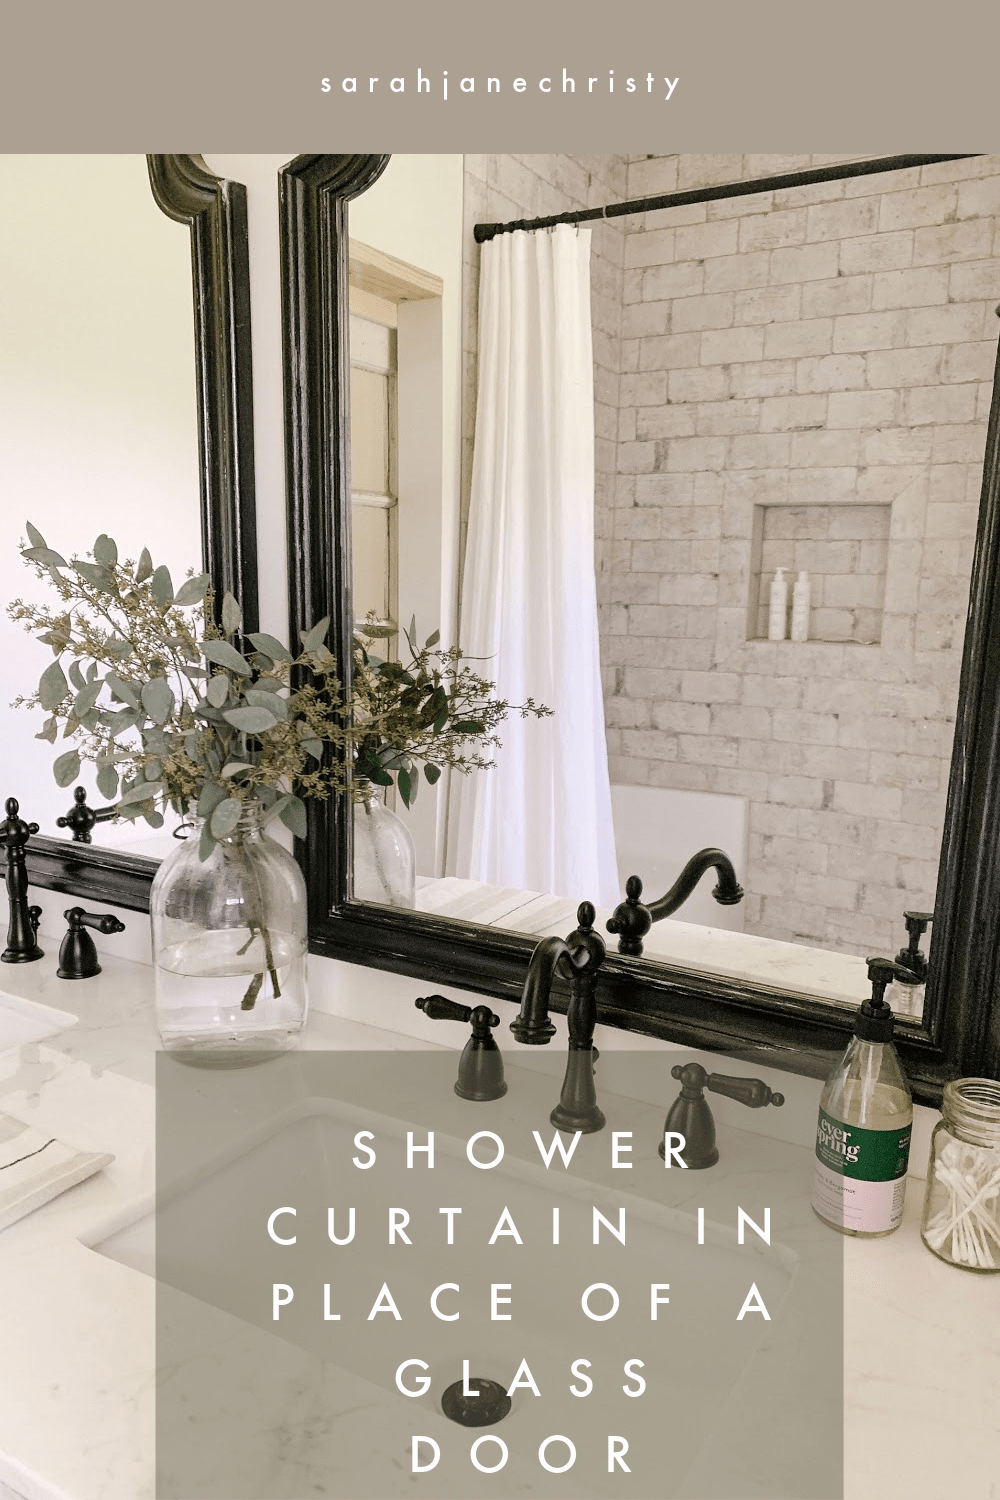 Shower Curtain Instead Of A Glass Door, Can You Use Shower Curtain For Walk In